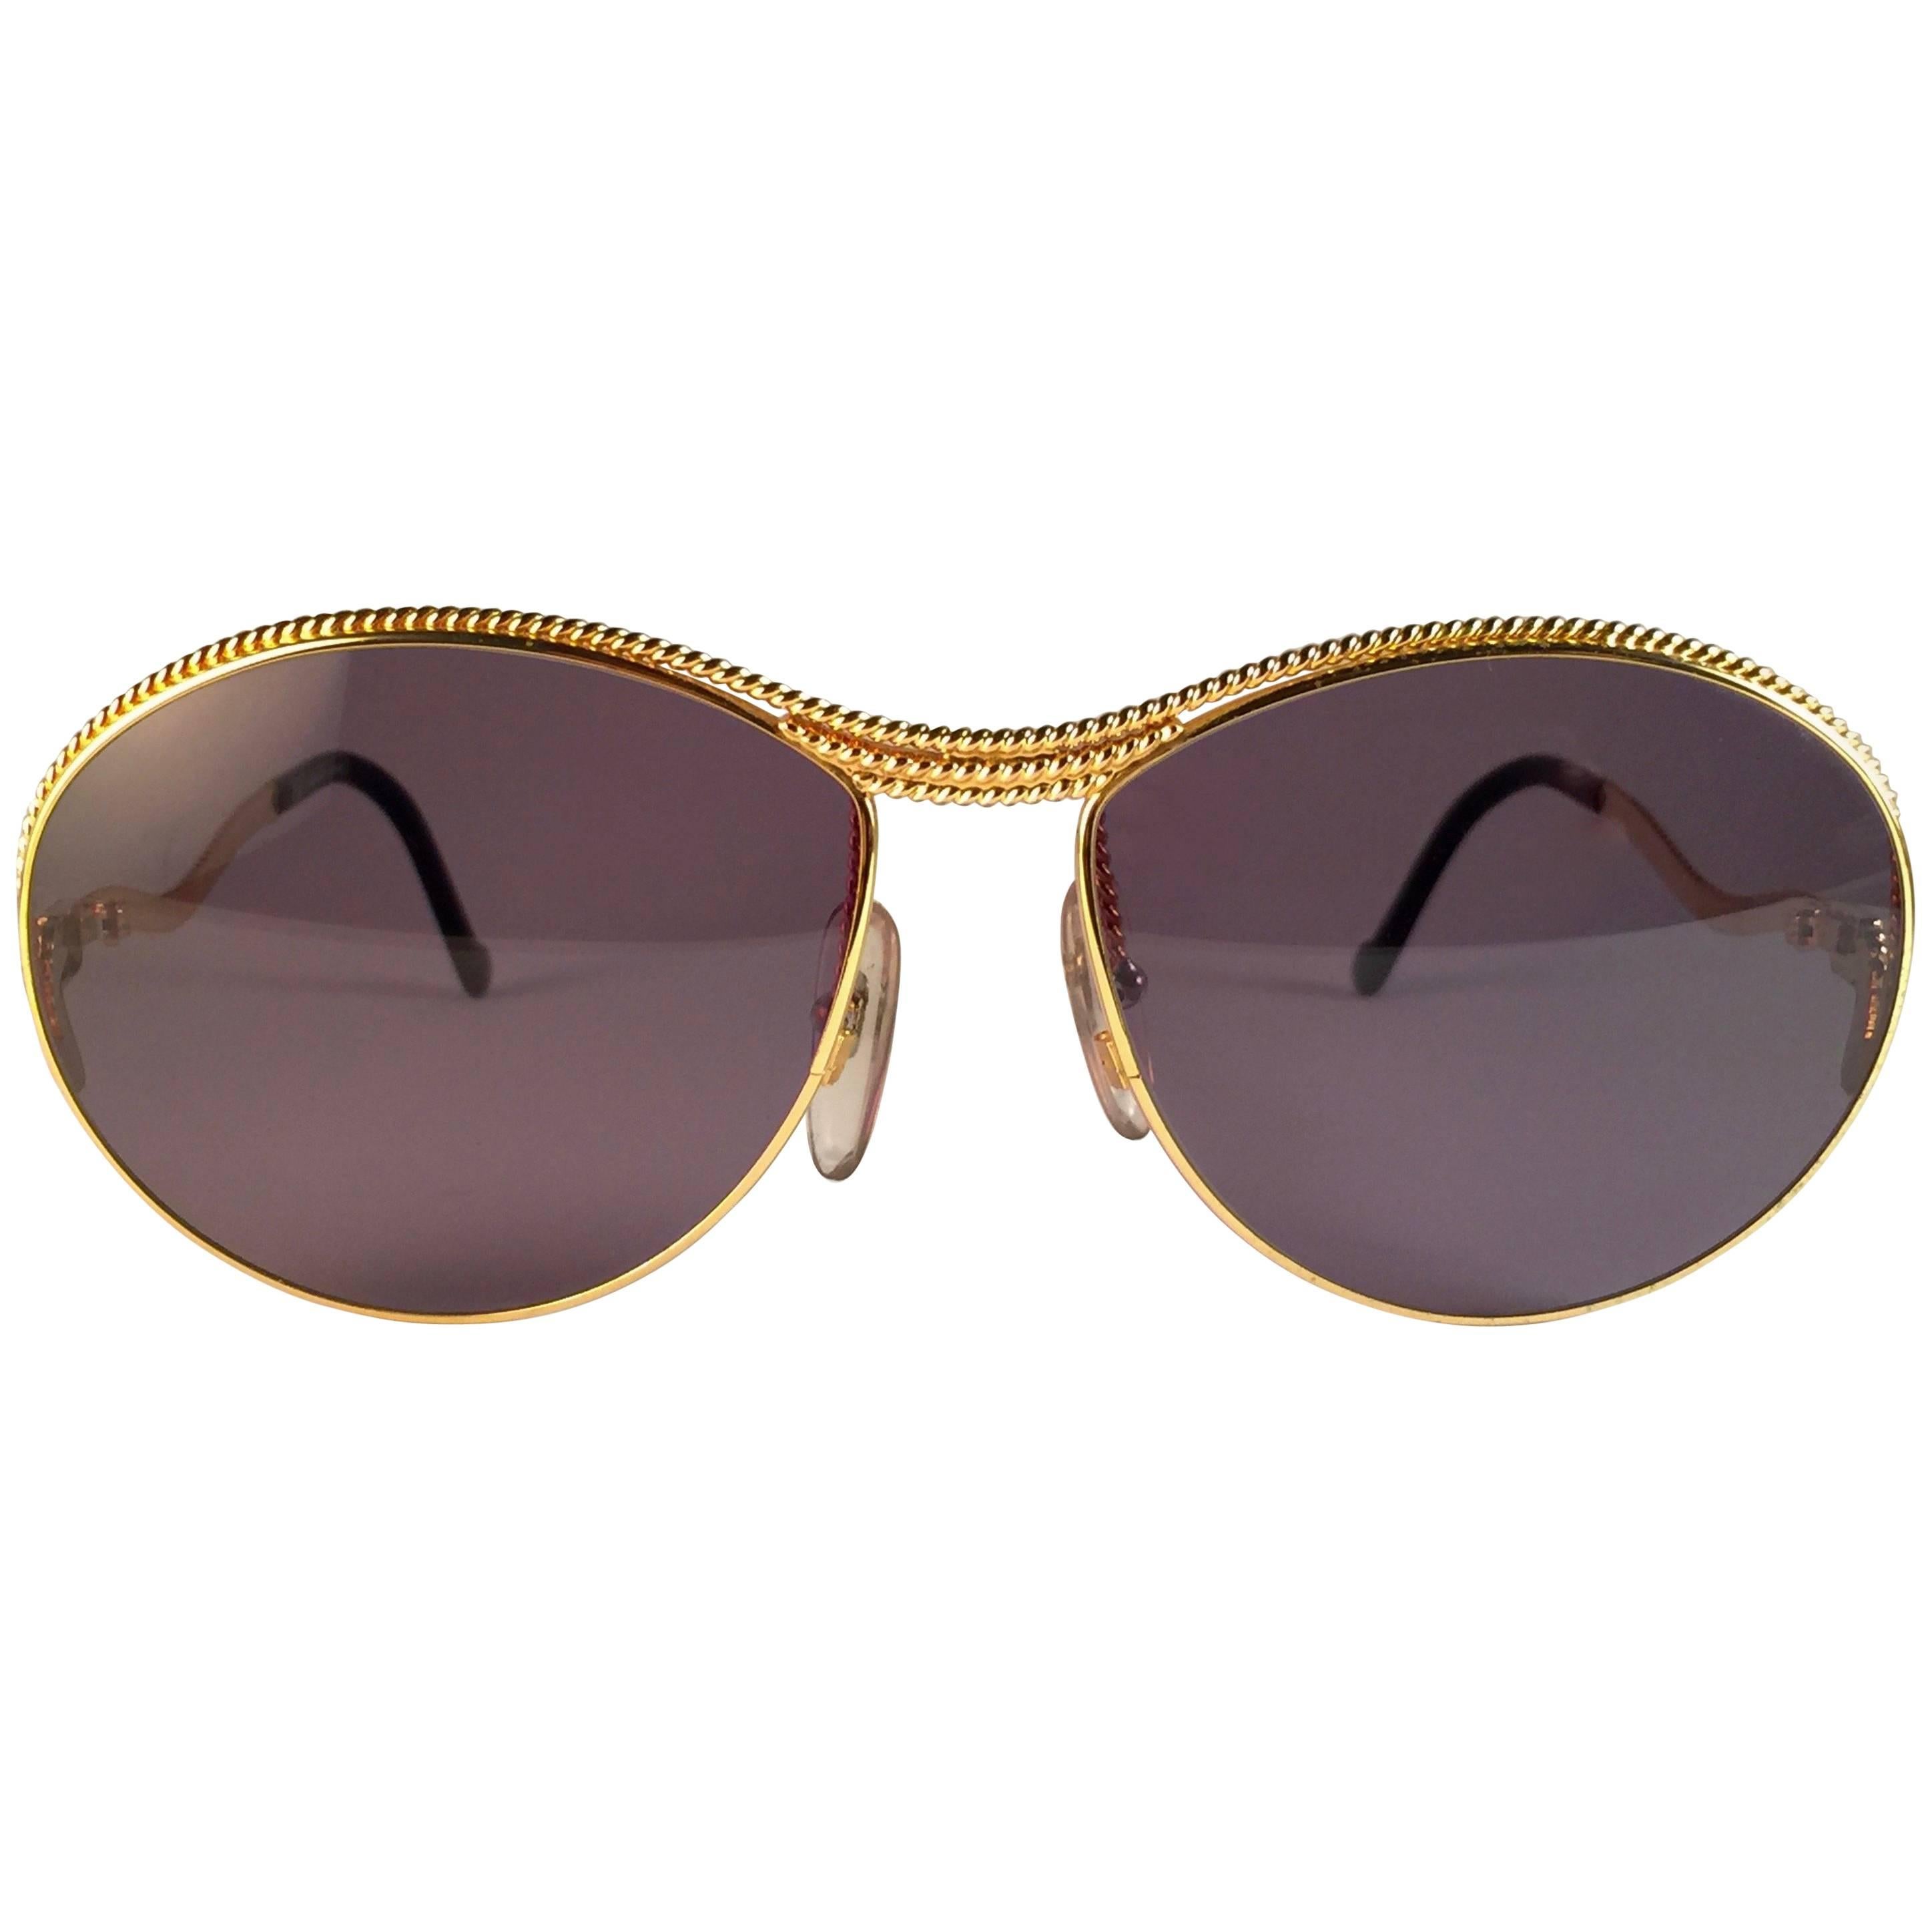 New Vintage Christian Lacroix Ocre Gold Accents 1980 France Sunglass ...